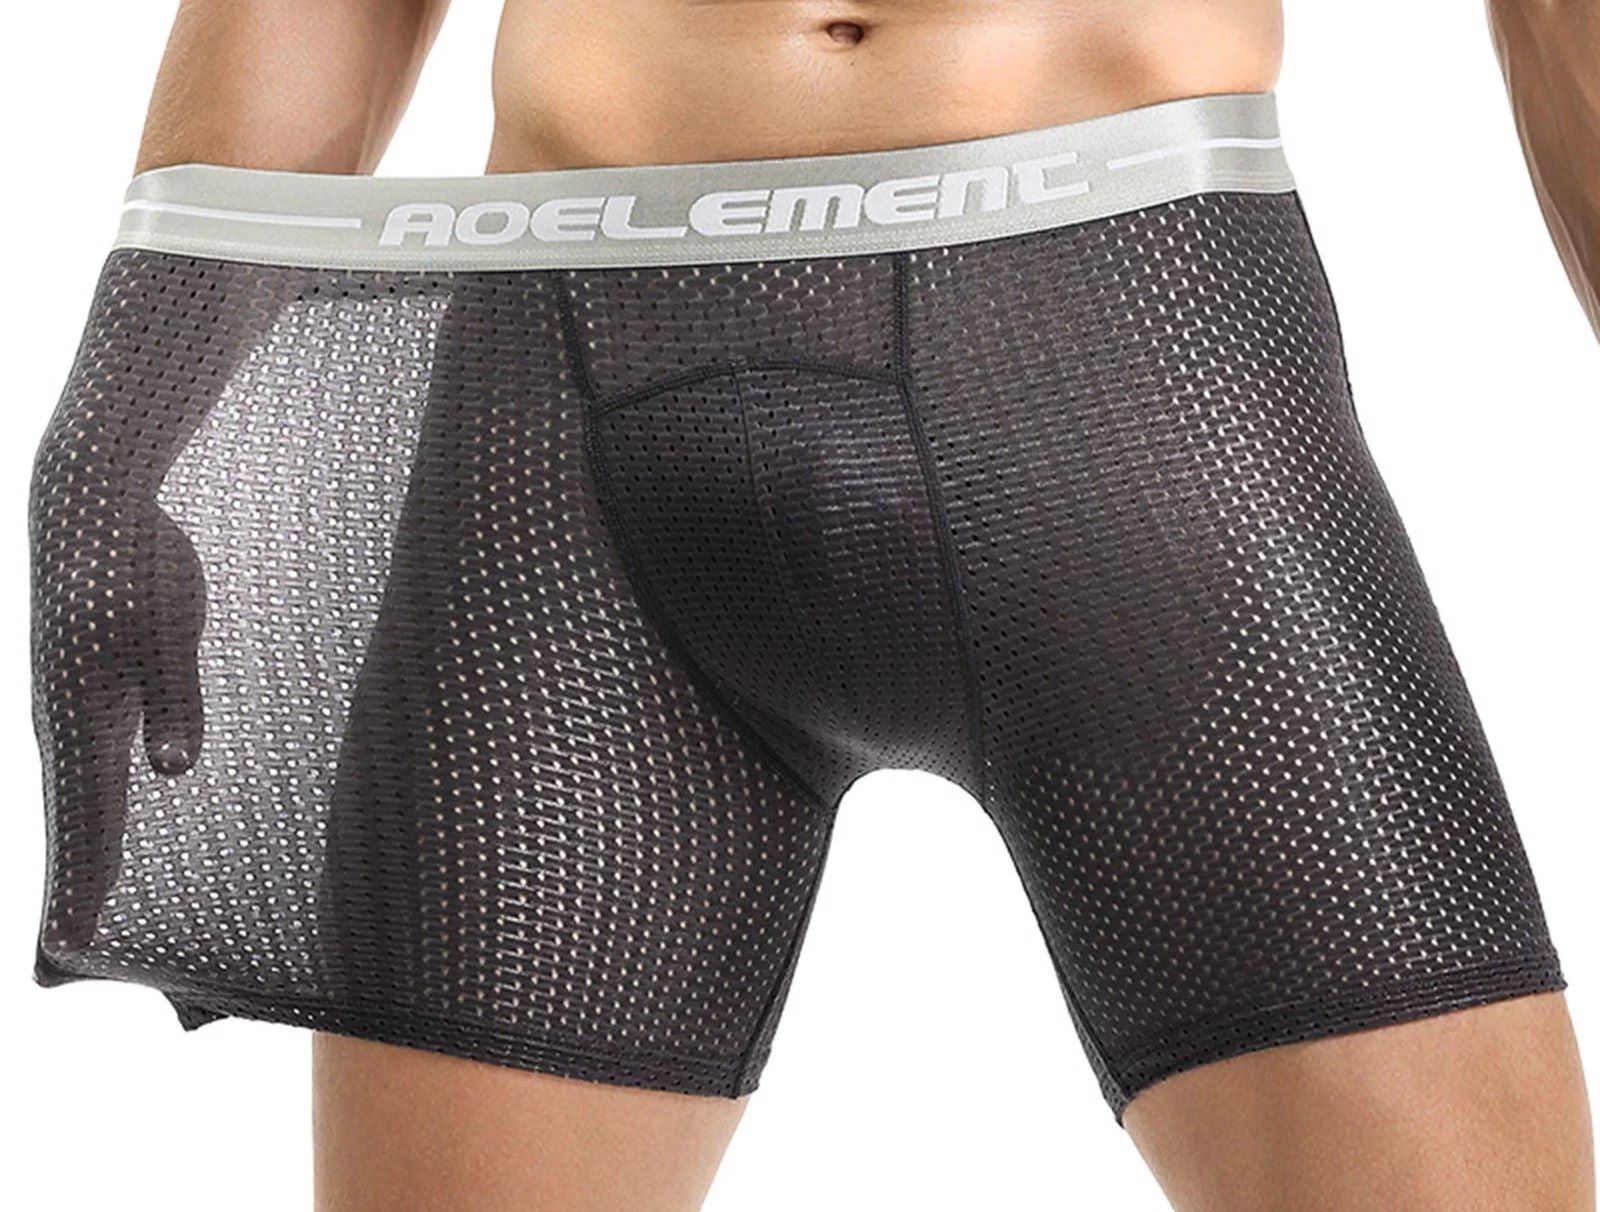 How Long Should I Wear Tight Underwear For After Vasectomy